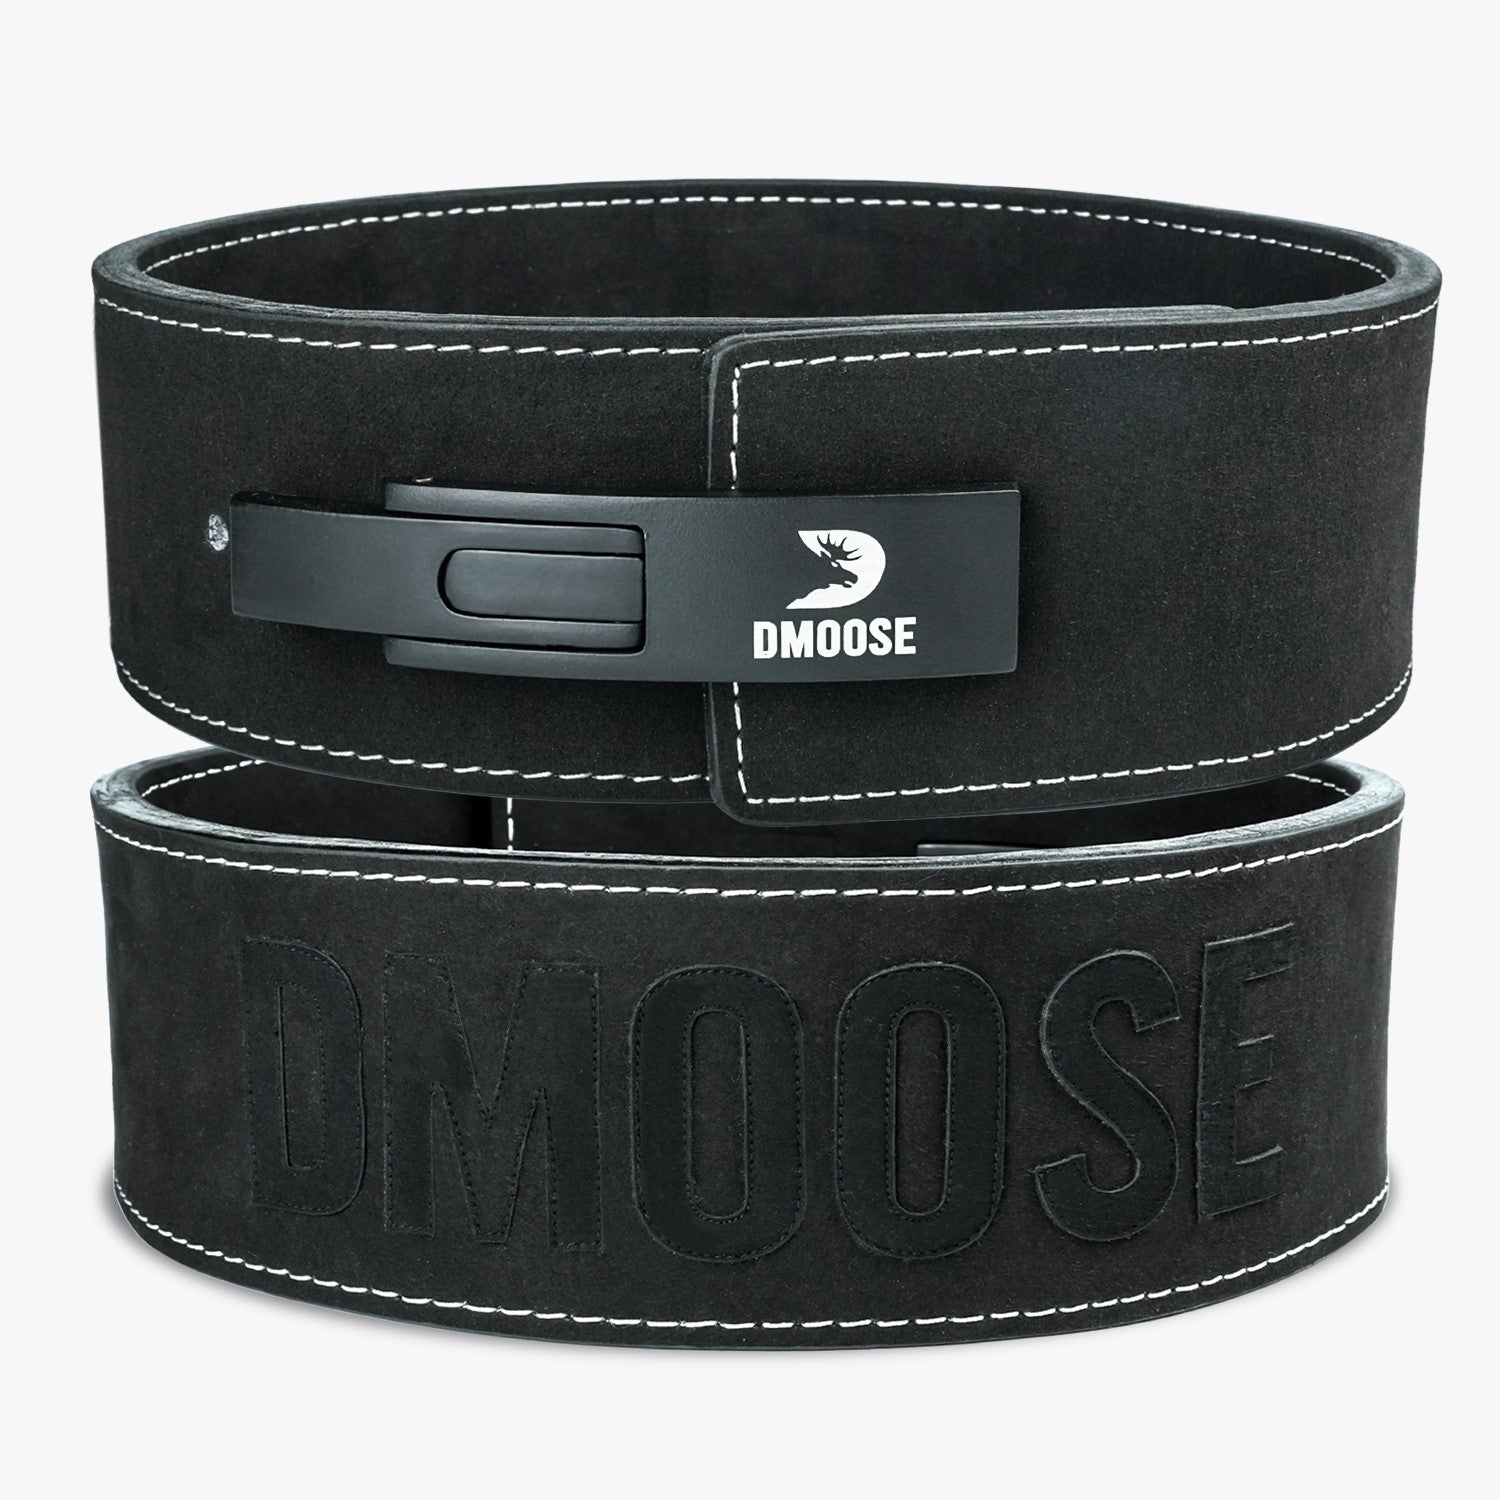 DMoose Nylon Weightlifting Belt The Ultimate Training Aid 